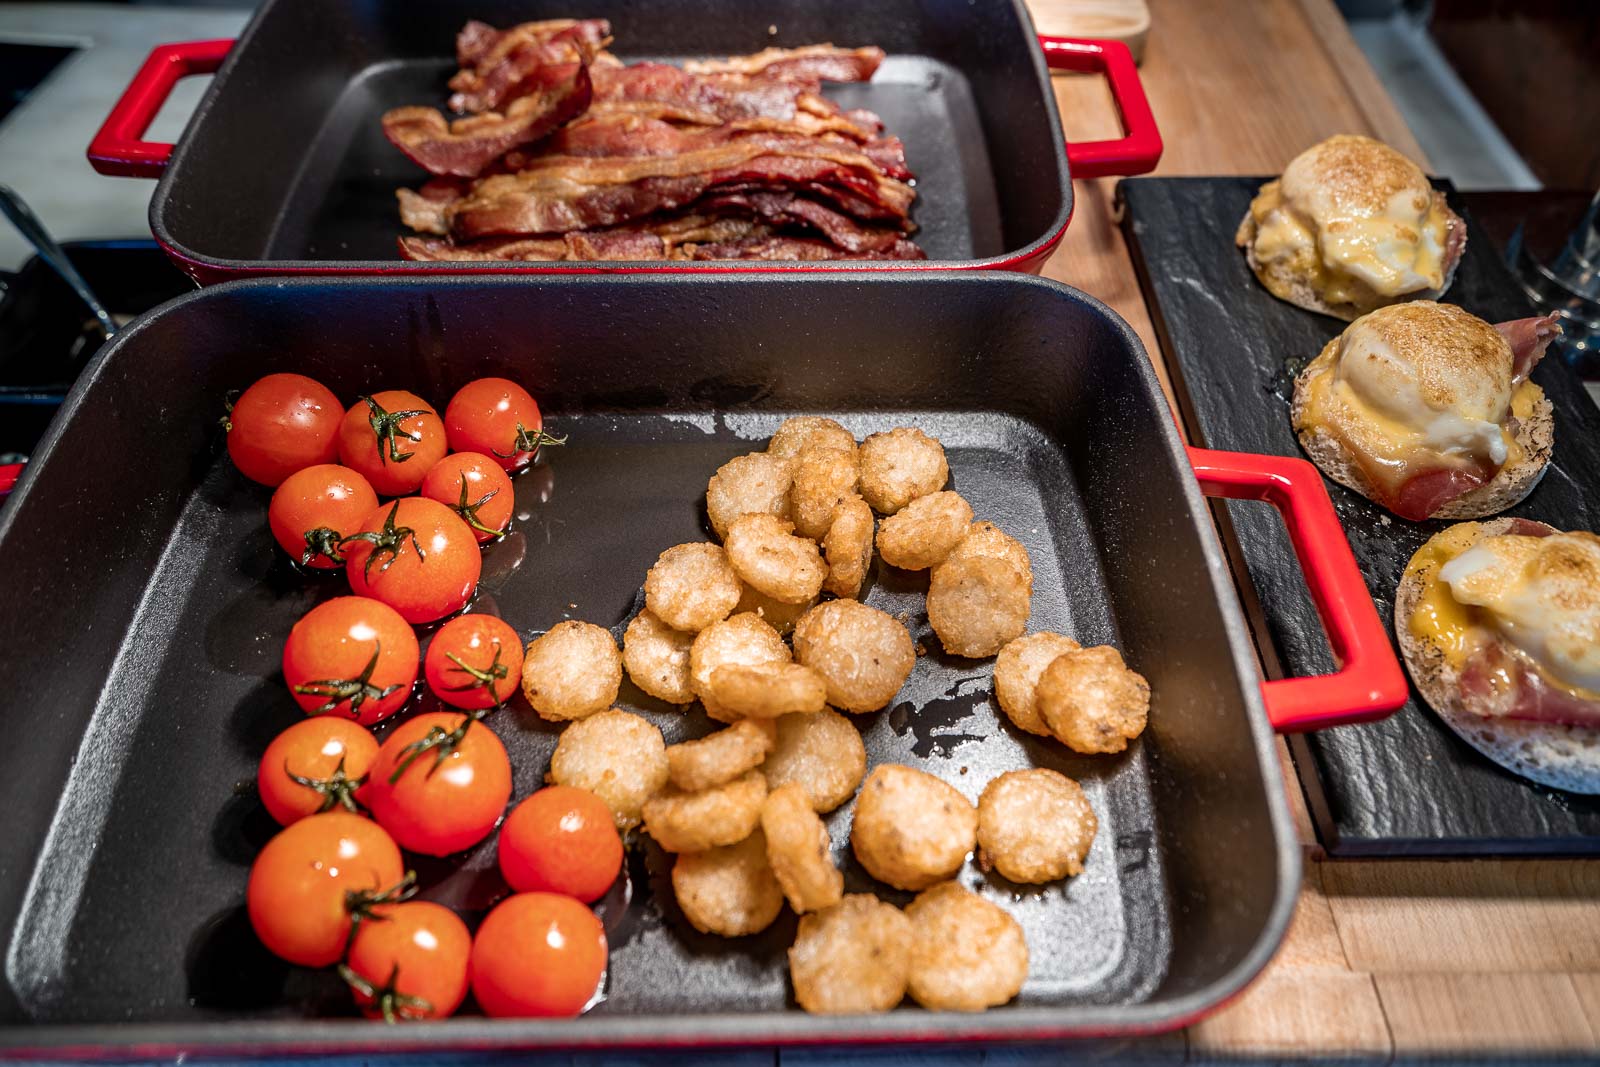 Fried potatos, tomatoes and bacon slices for breakfast